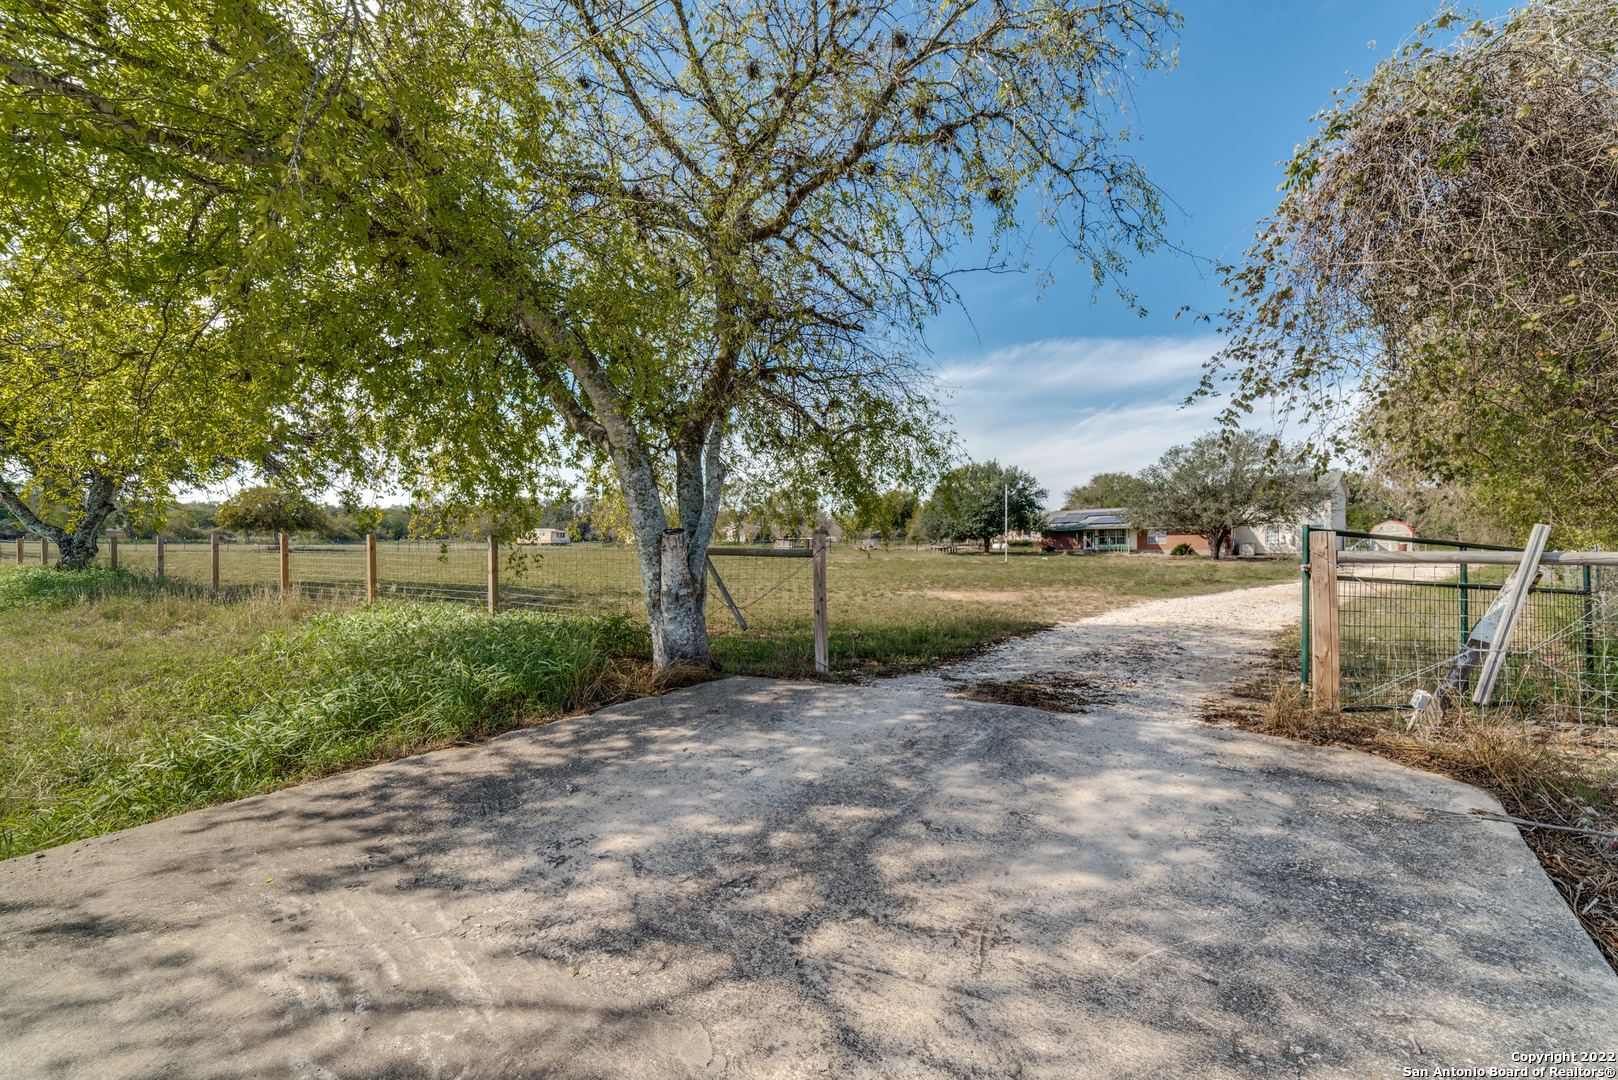 This home is truly a rare gem! This beautiful home is situated on a 2.95-acre lot with a studio apartment above the garage! The property is just outside of city limits so all livestock is allowed, yet it's still connected to city water and located within Bexar County. Solar panels will be paid off upon closing as well!